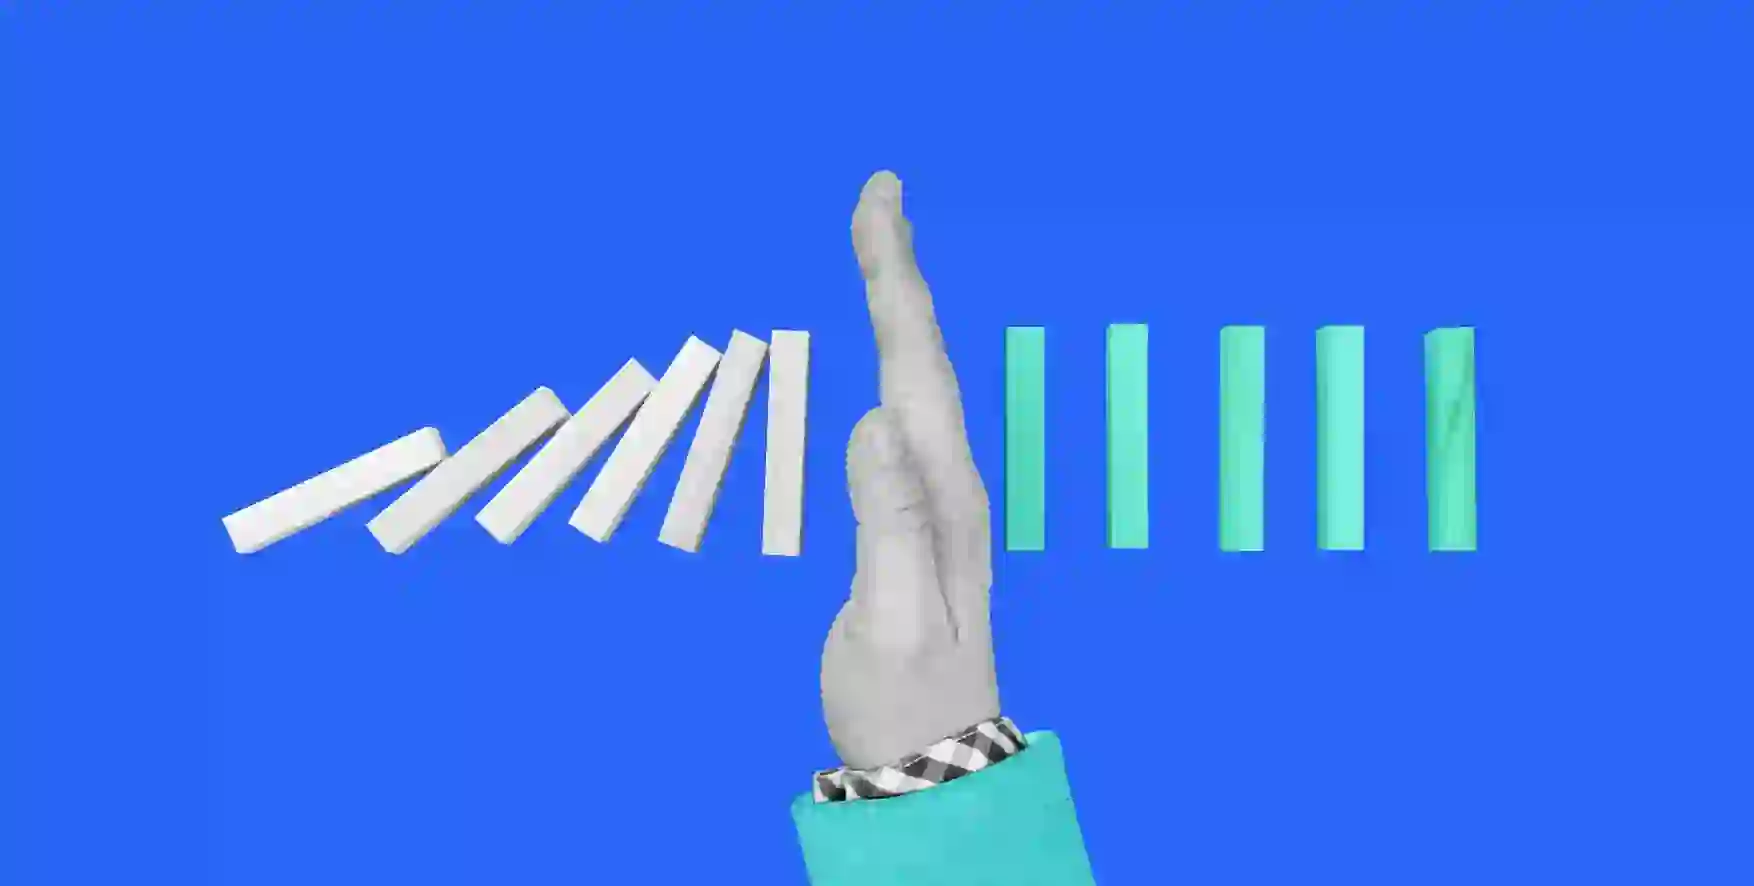 the hand is located between falling and standing dominoes